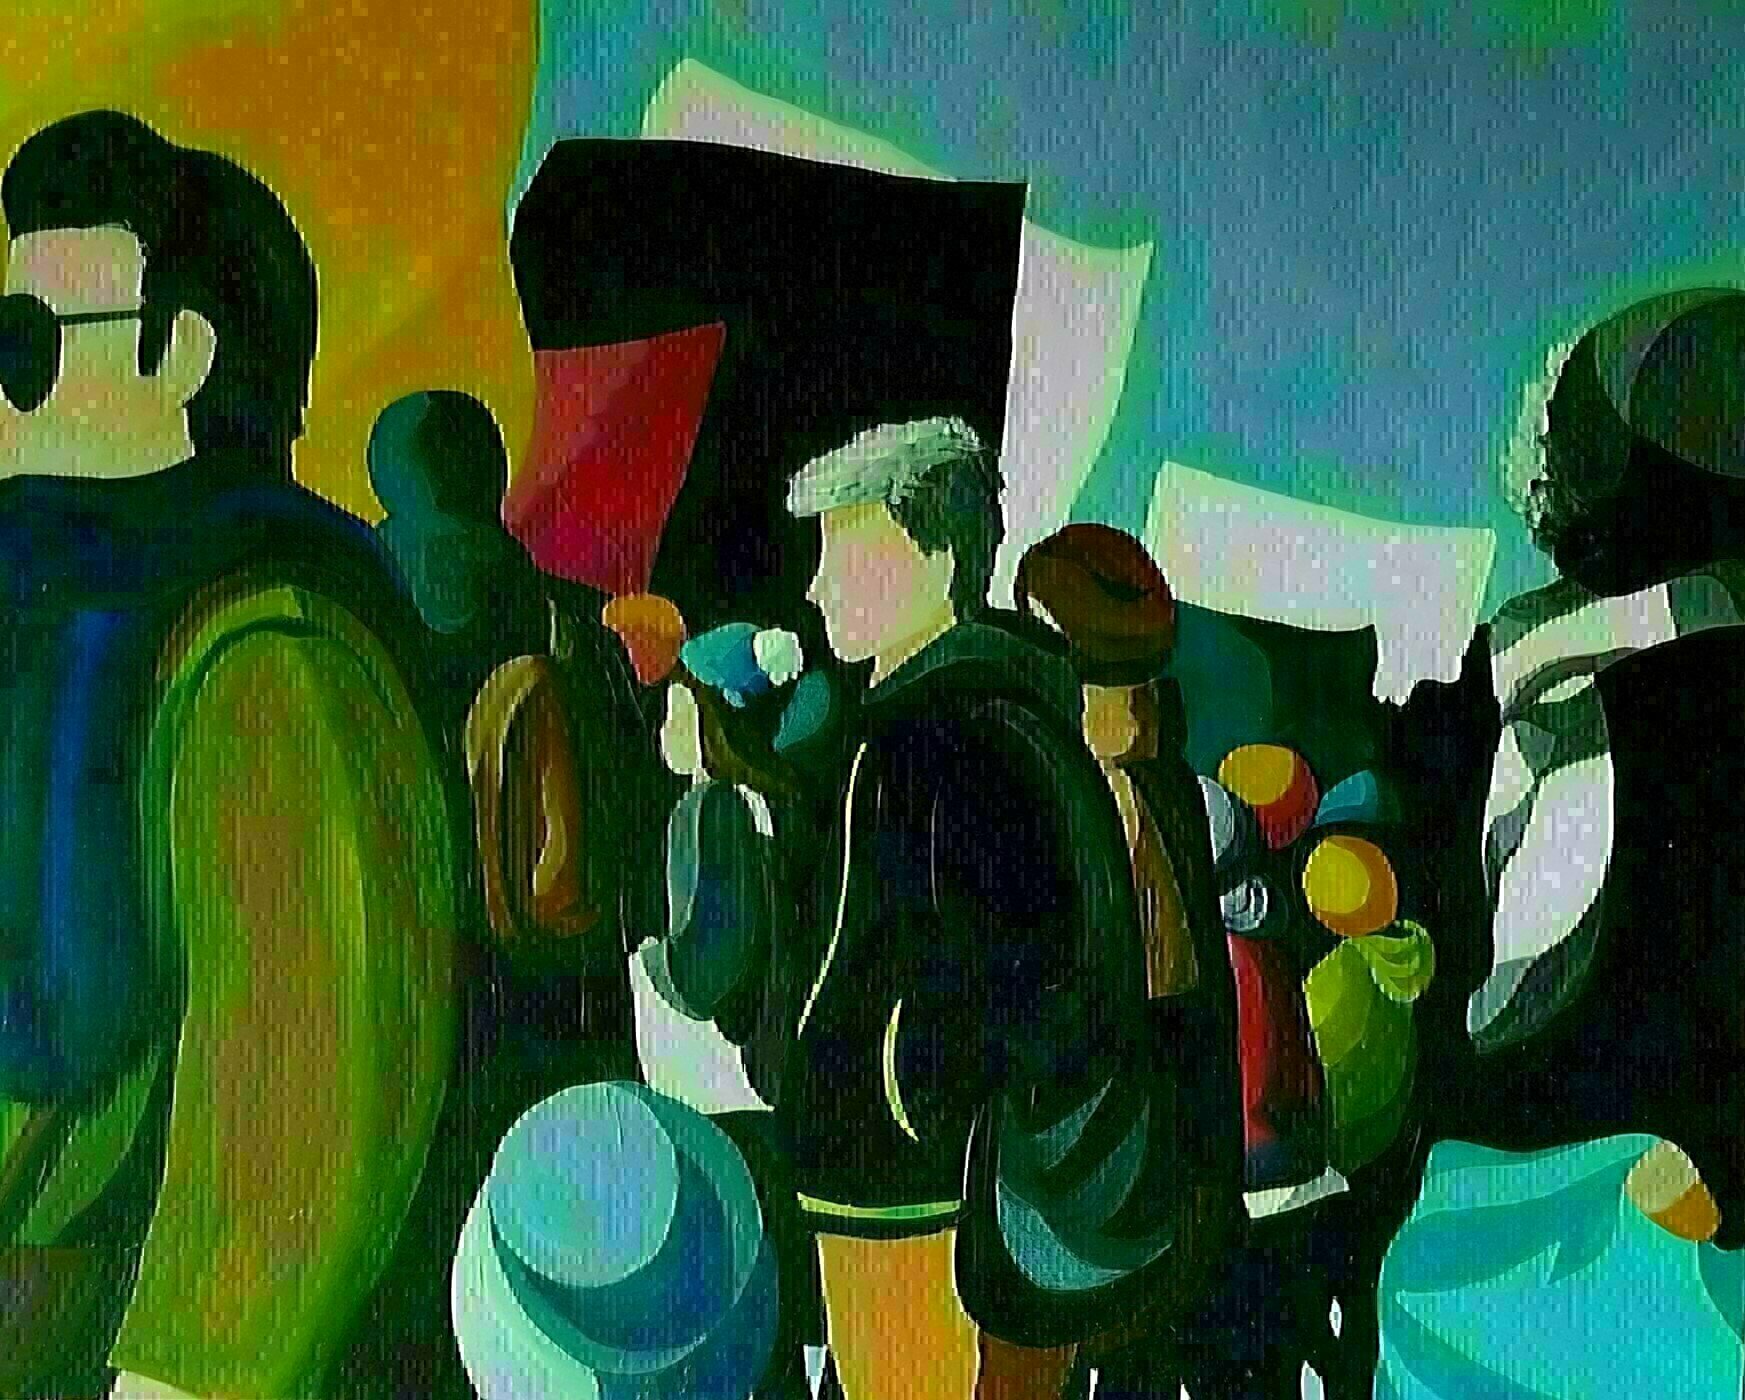 Denise Dalzell, 'Spectators', 2019, original Painting Acrylic, 30 x 24  x 2 inches. Artwork description: 3495 painting, spectators, illustration, expressionism, pop art, modern, realism, people, protestA scene of a protest passing through a crowd of spectators. ...